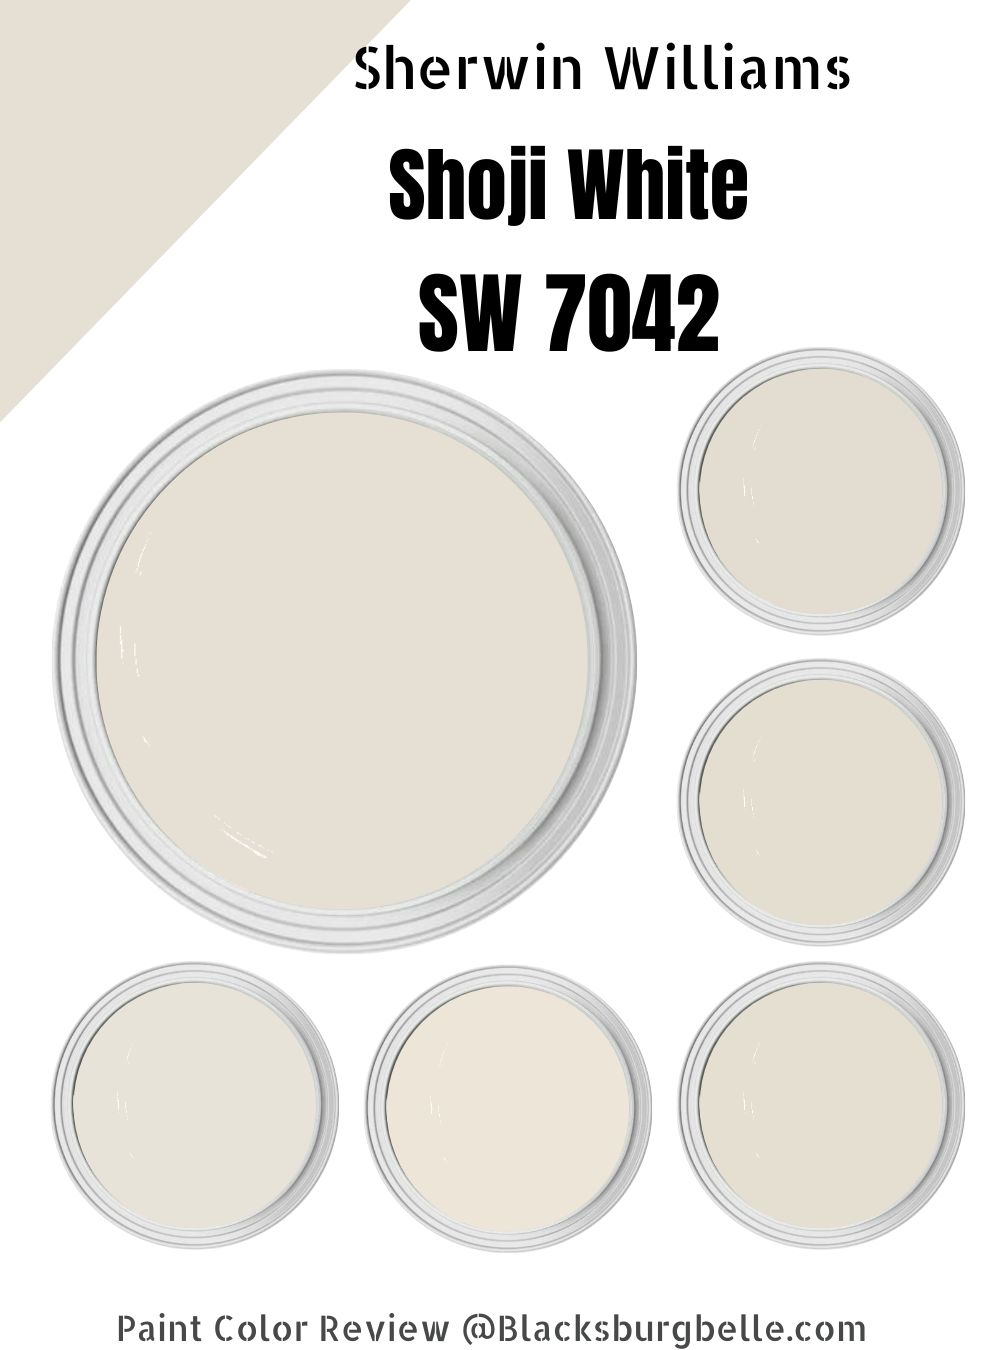 My Review of Shoji White by Sherwin Williams - Interior and Exterior Paint